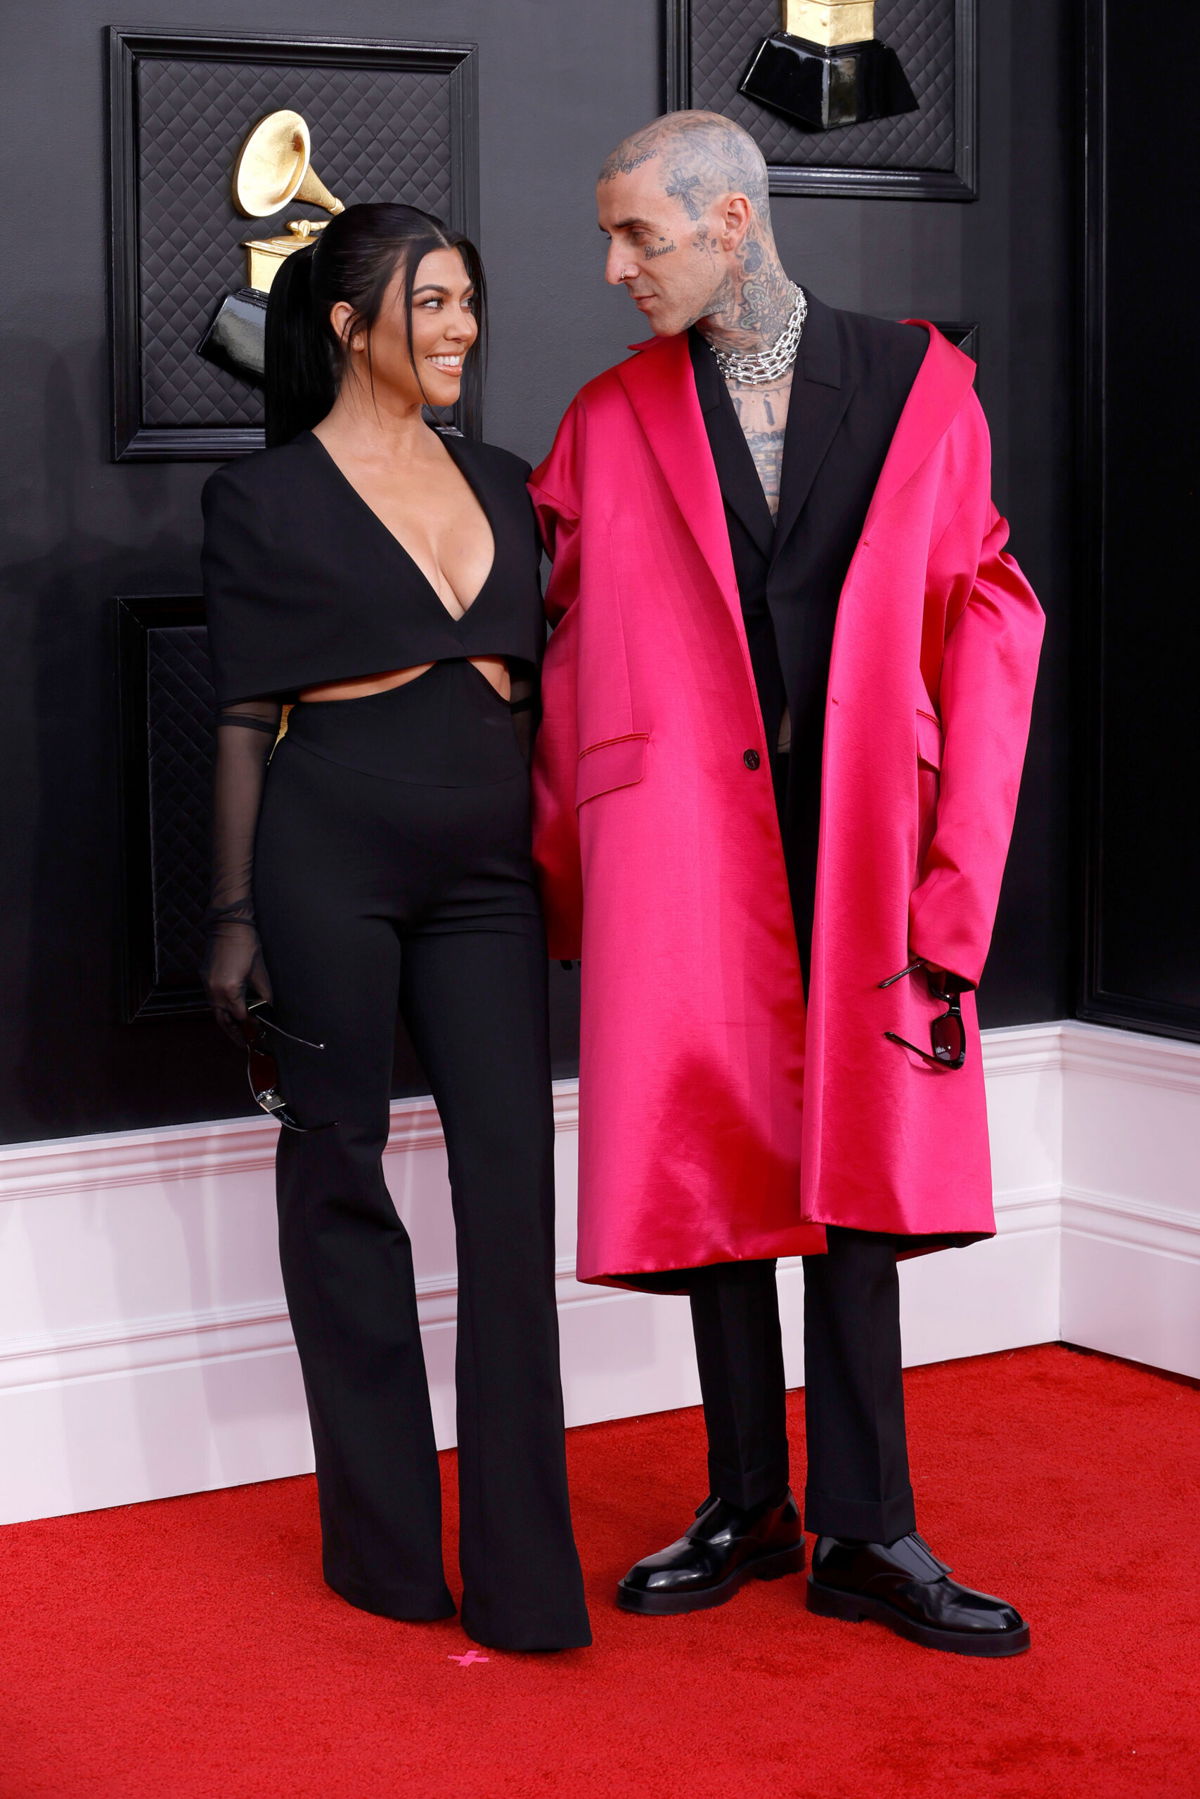 <i>Frazer Harrison/Getty Images for The Recording Academy/File</i><br/>Kourtney Kardashian and Travis Barker pose at the Grammy Awards on April 3. Kardashian shared a series of snapshots of herself and Barker taken at a Las Vegas wedding chapel